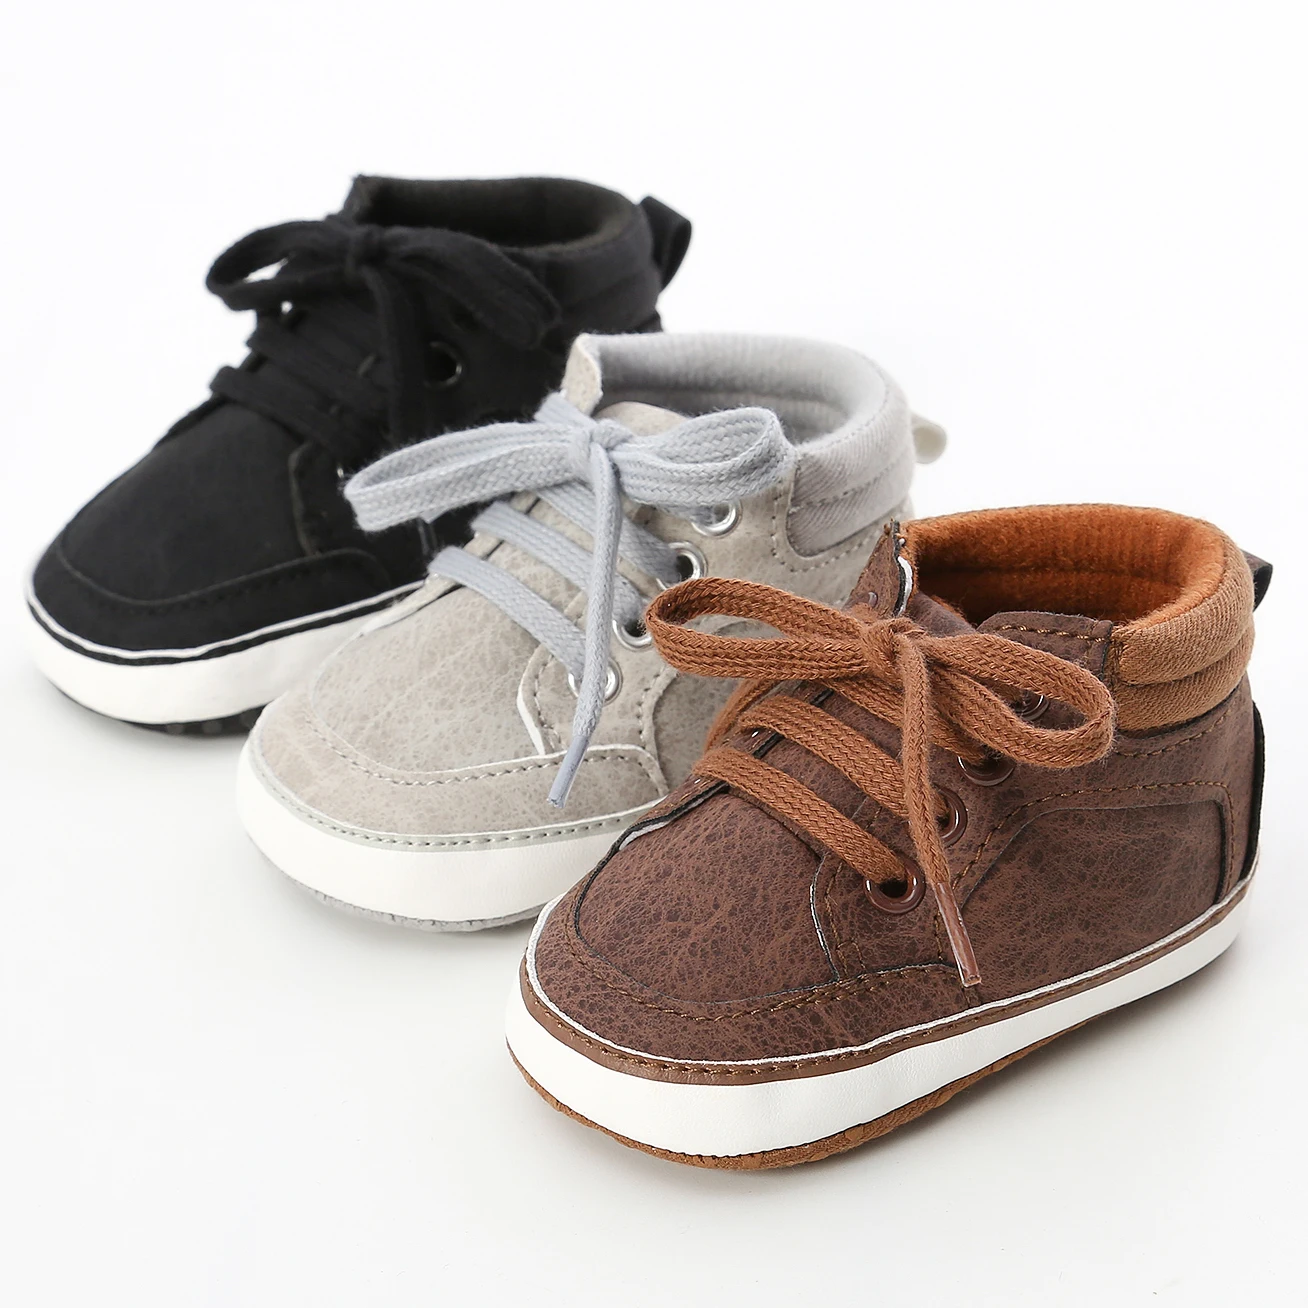 

New designed PU Leather shoes soft bottom newborn prewalker toddler boy baby boots, 3 colors